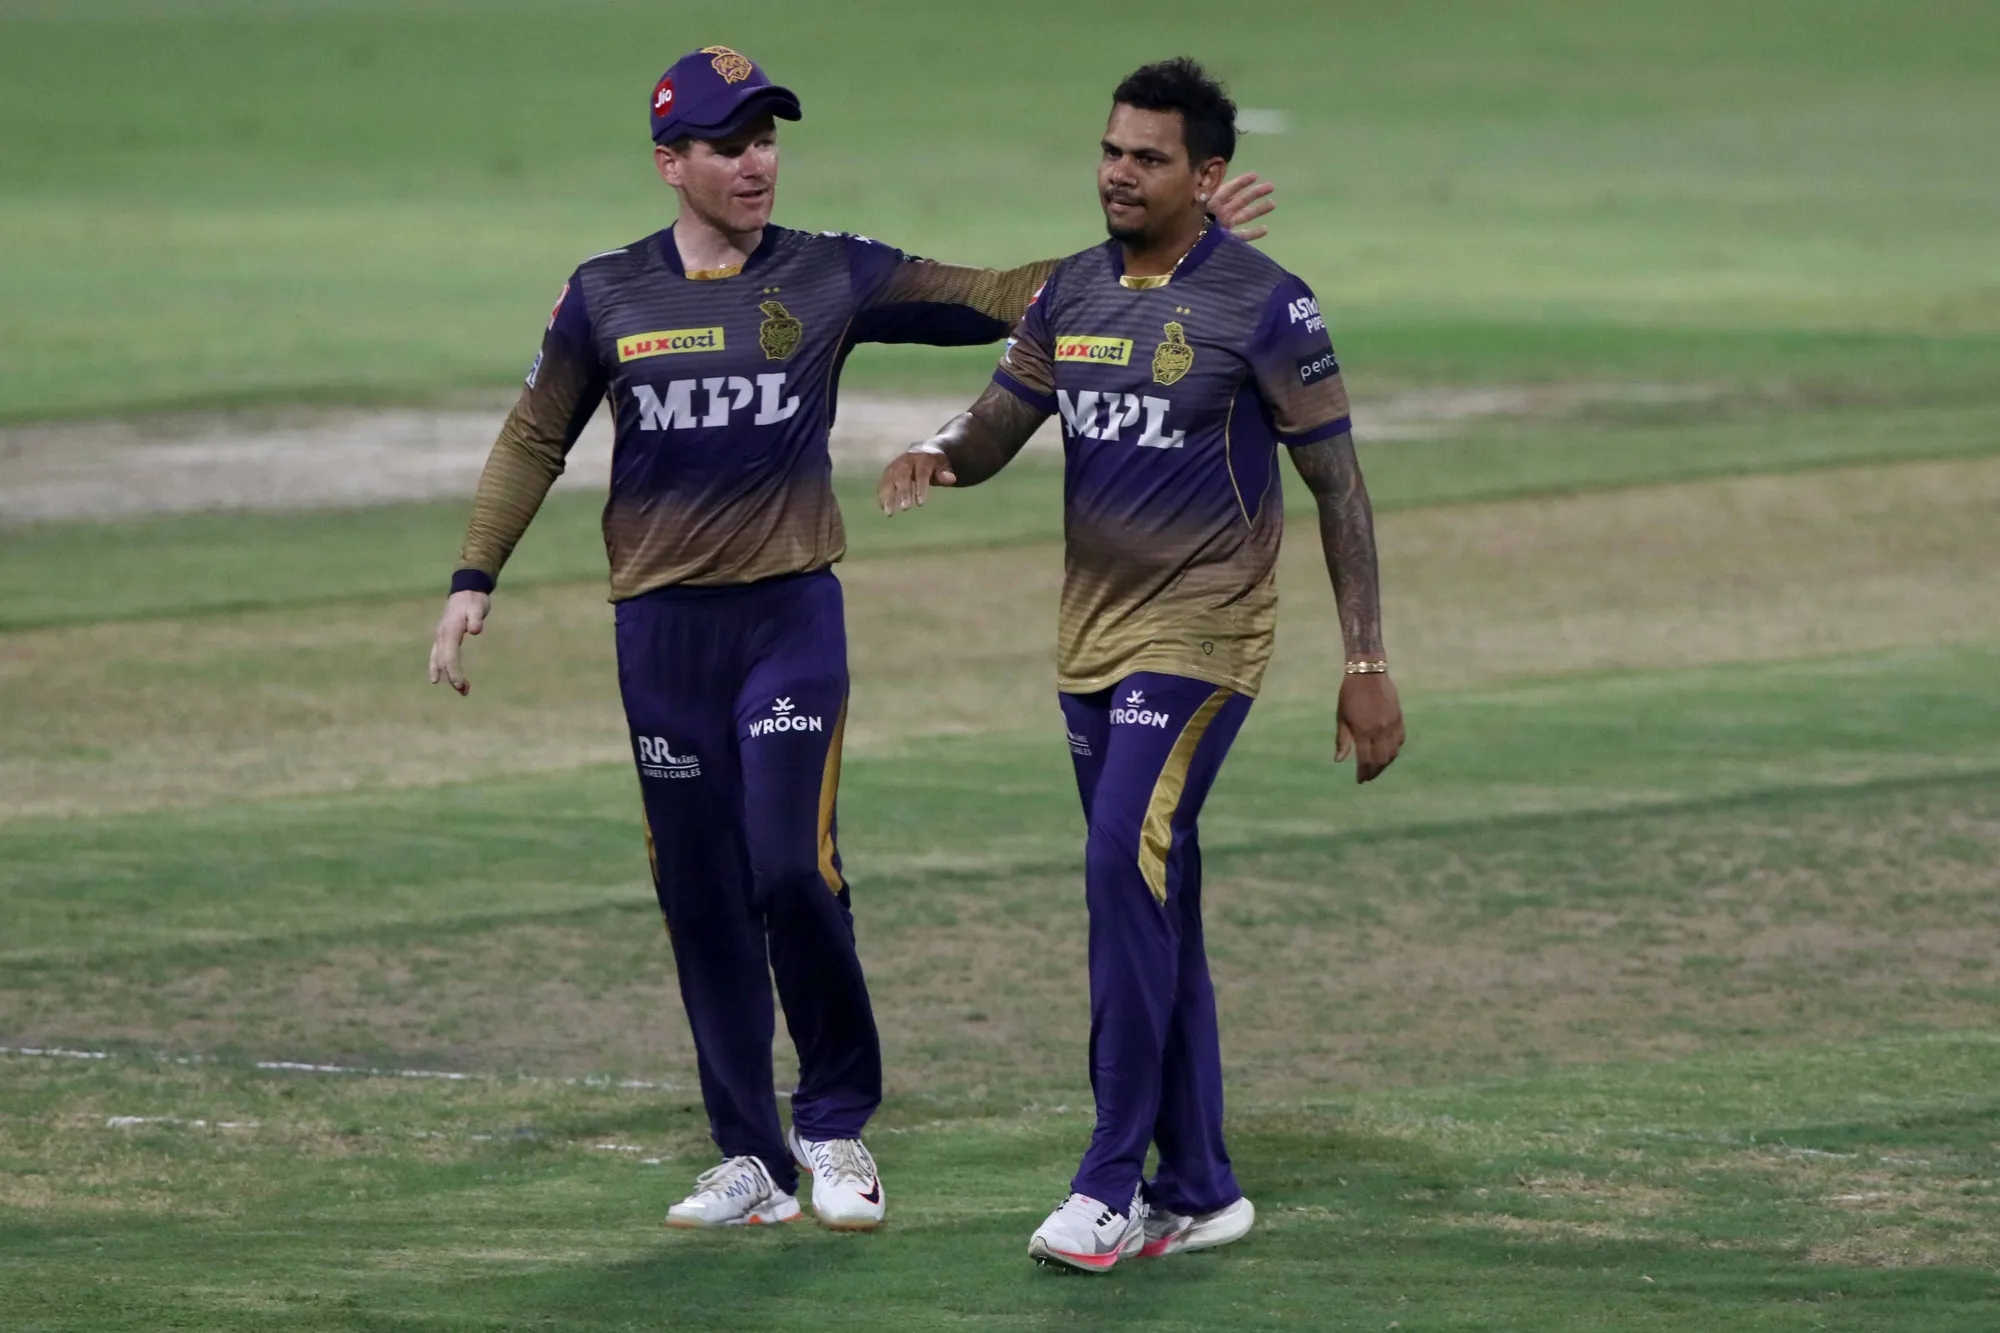 Sunil Narine contributed 26 runs in KKR's successful chase against RCB | BCCI/IPL